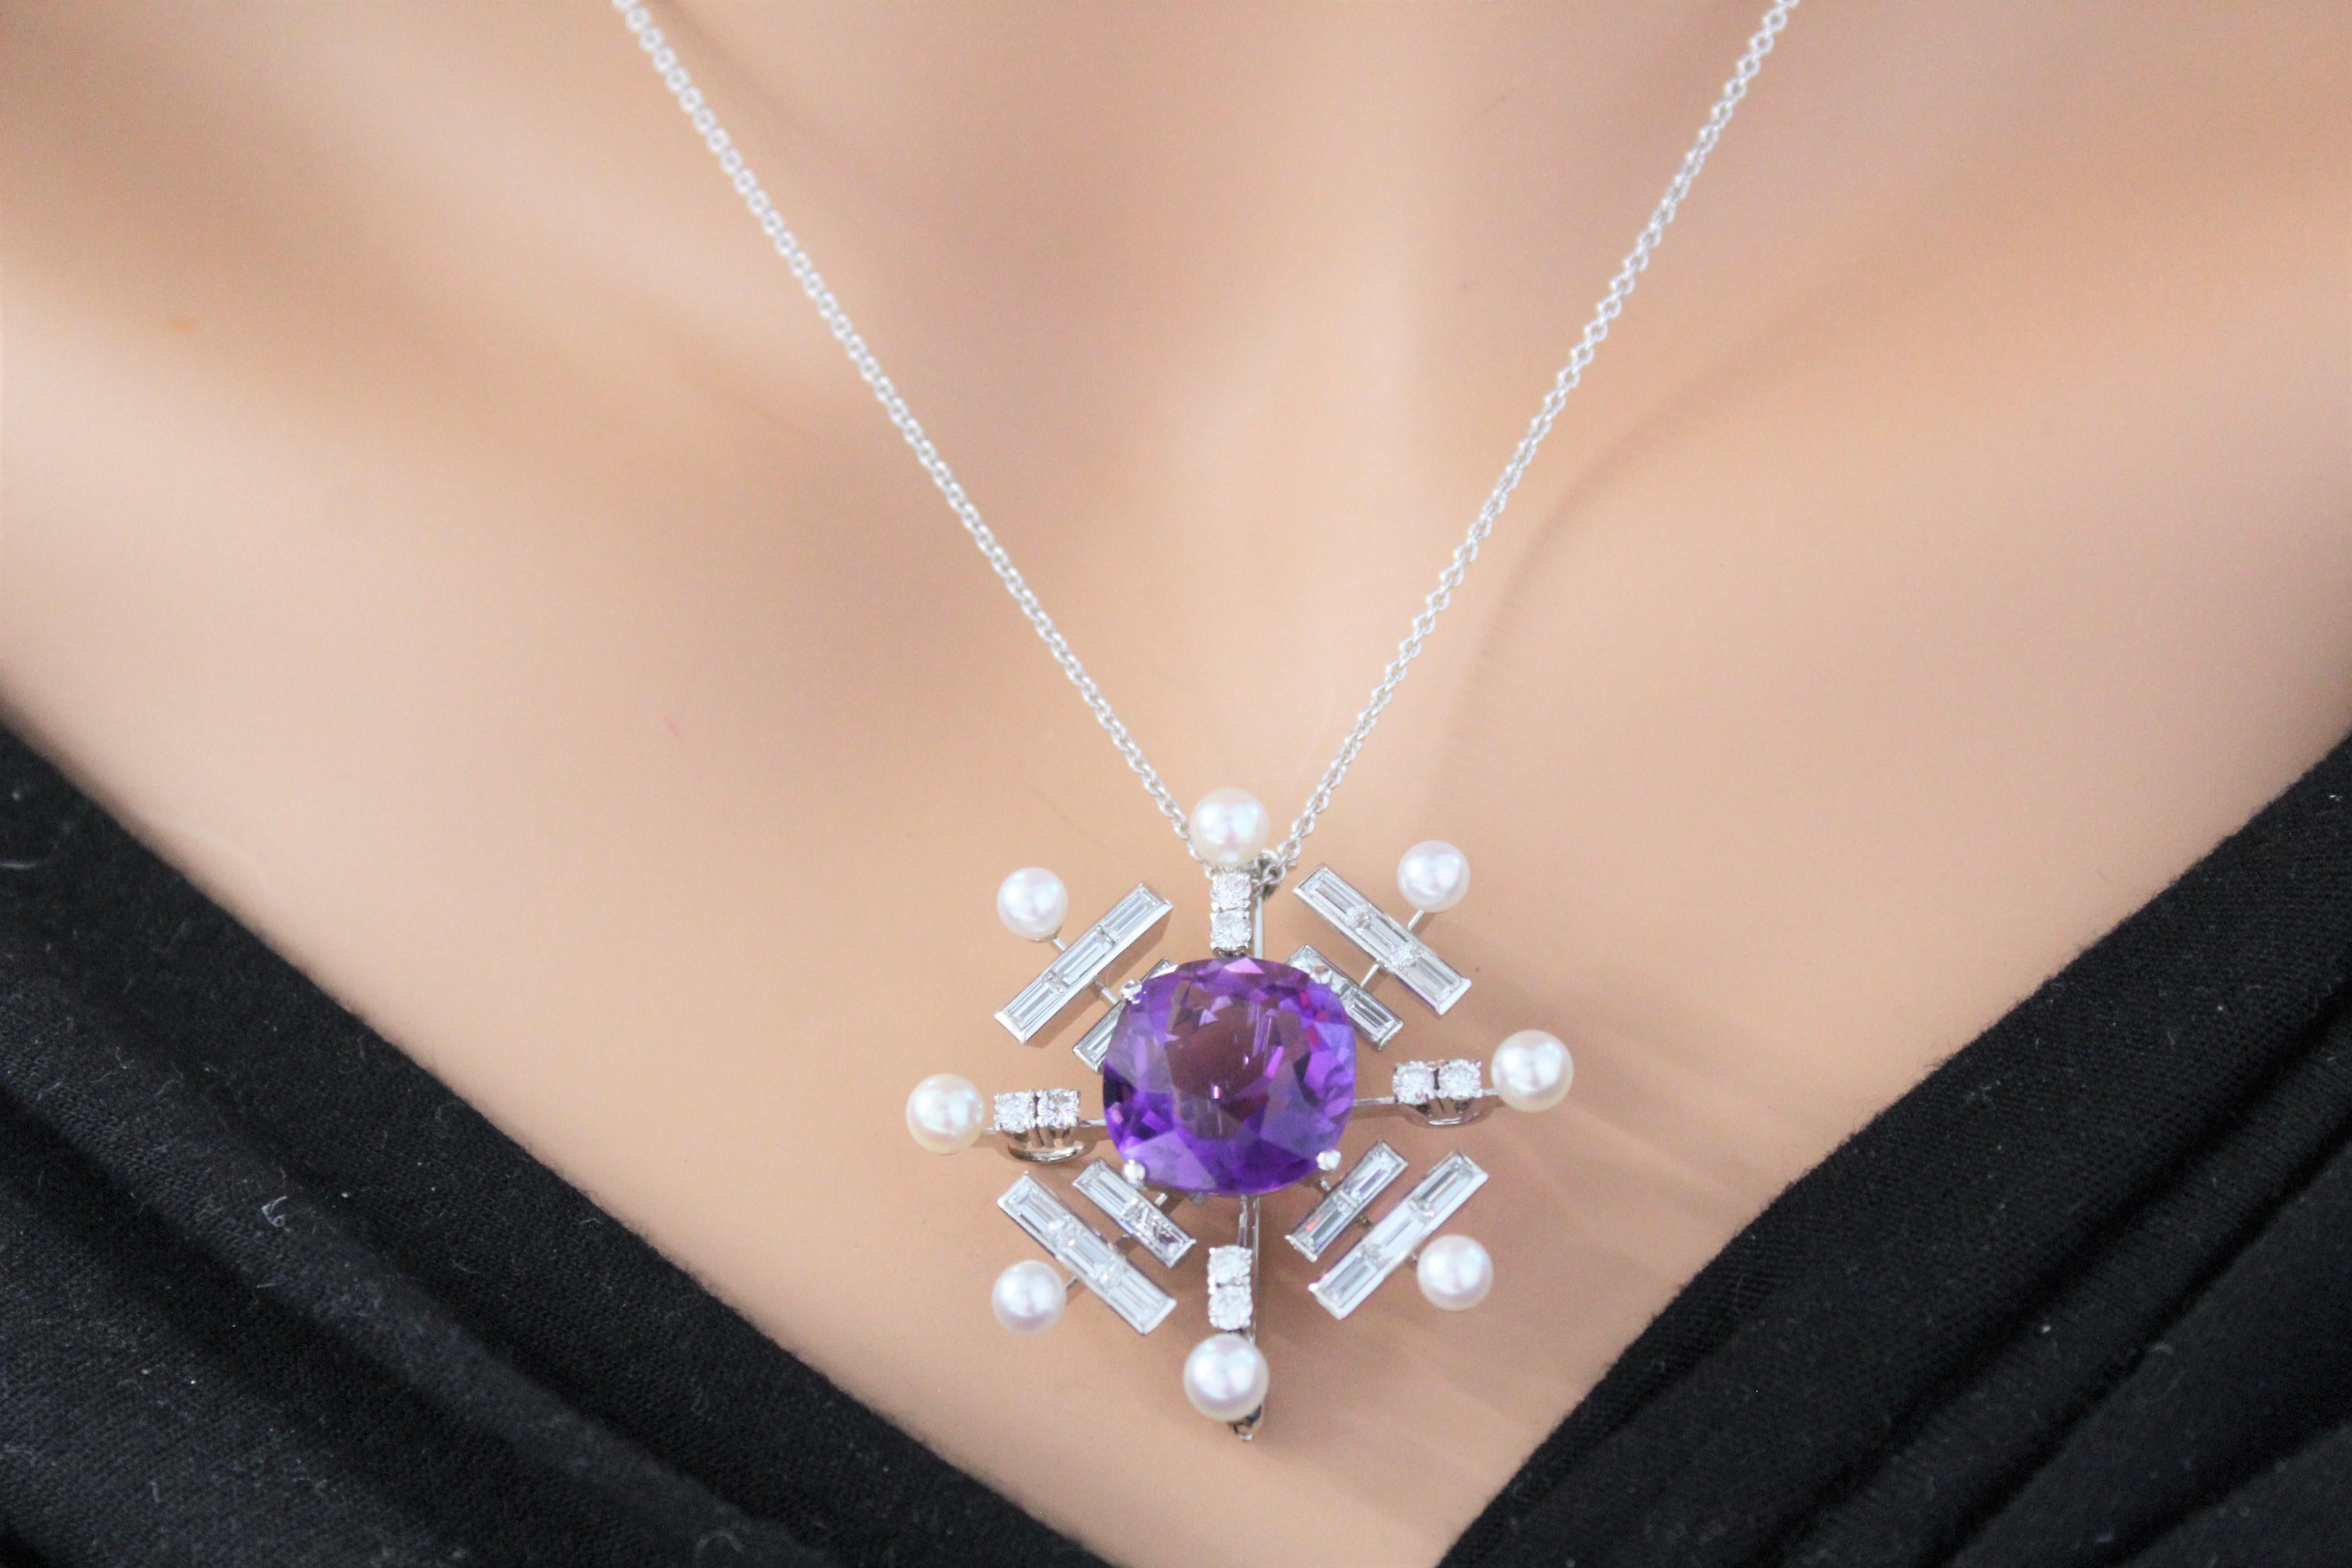 This gorgeous diamond pendant is set in 18K white gold. The total diamond weight of this piece is 2.10 carat total weight. The center stone is an Amethyst gemstone that weighs 10 carats. A pendant like this is the perfect way to tell your lovely